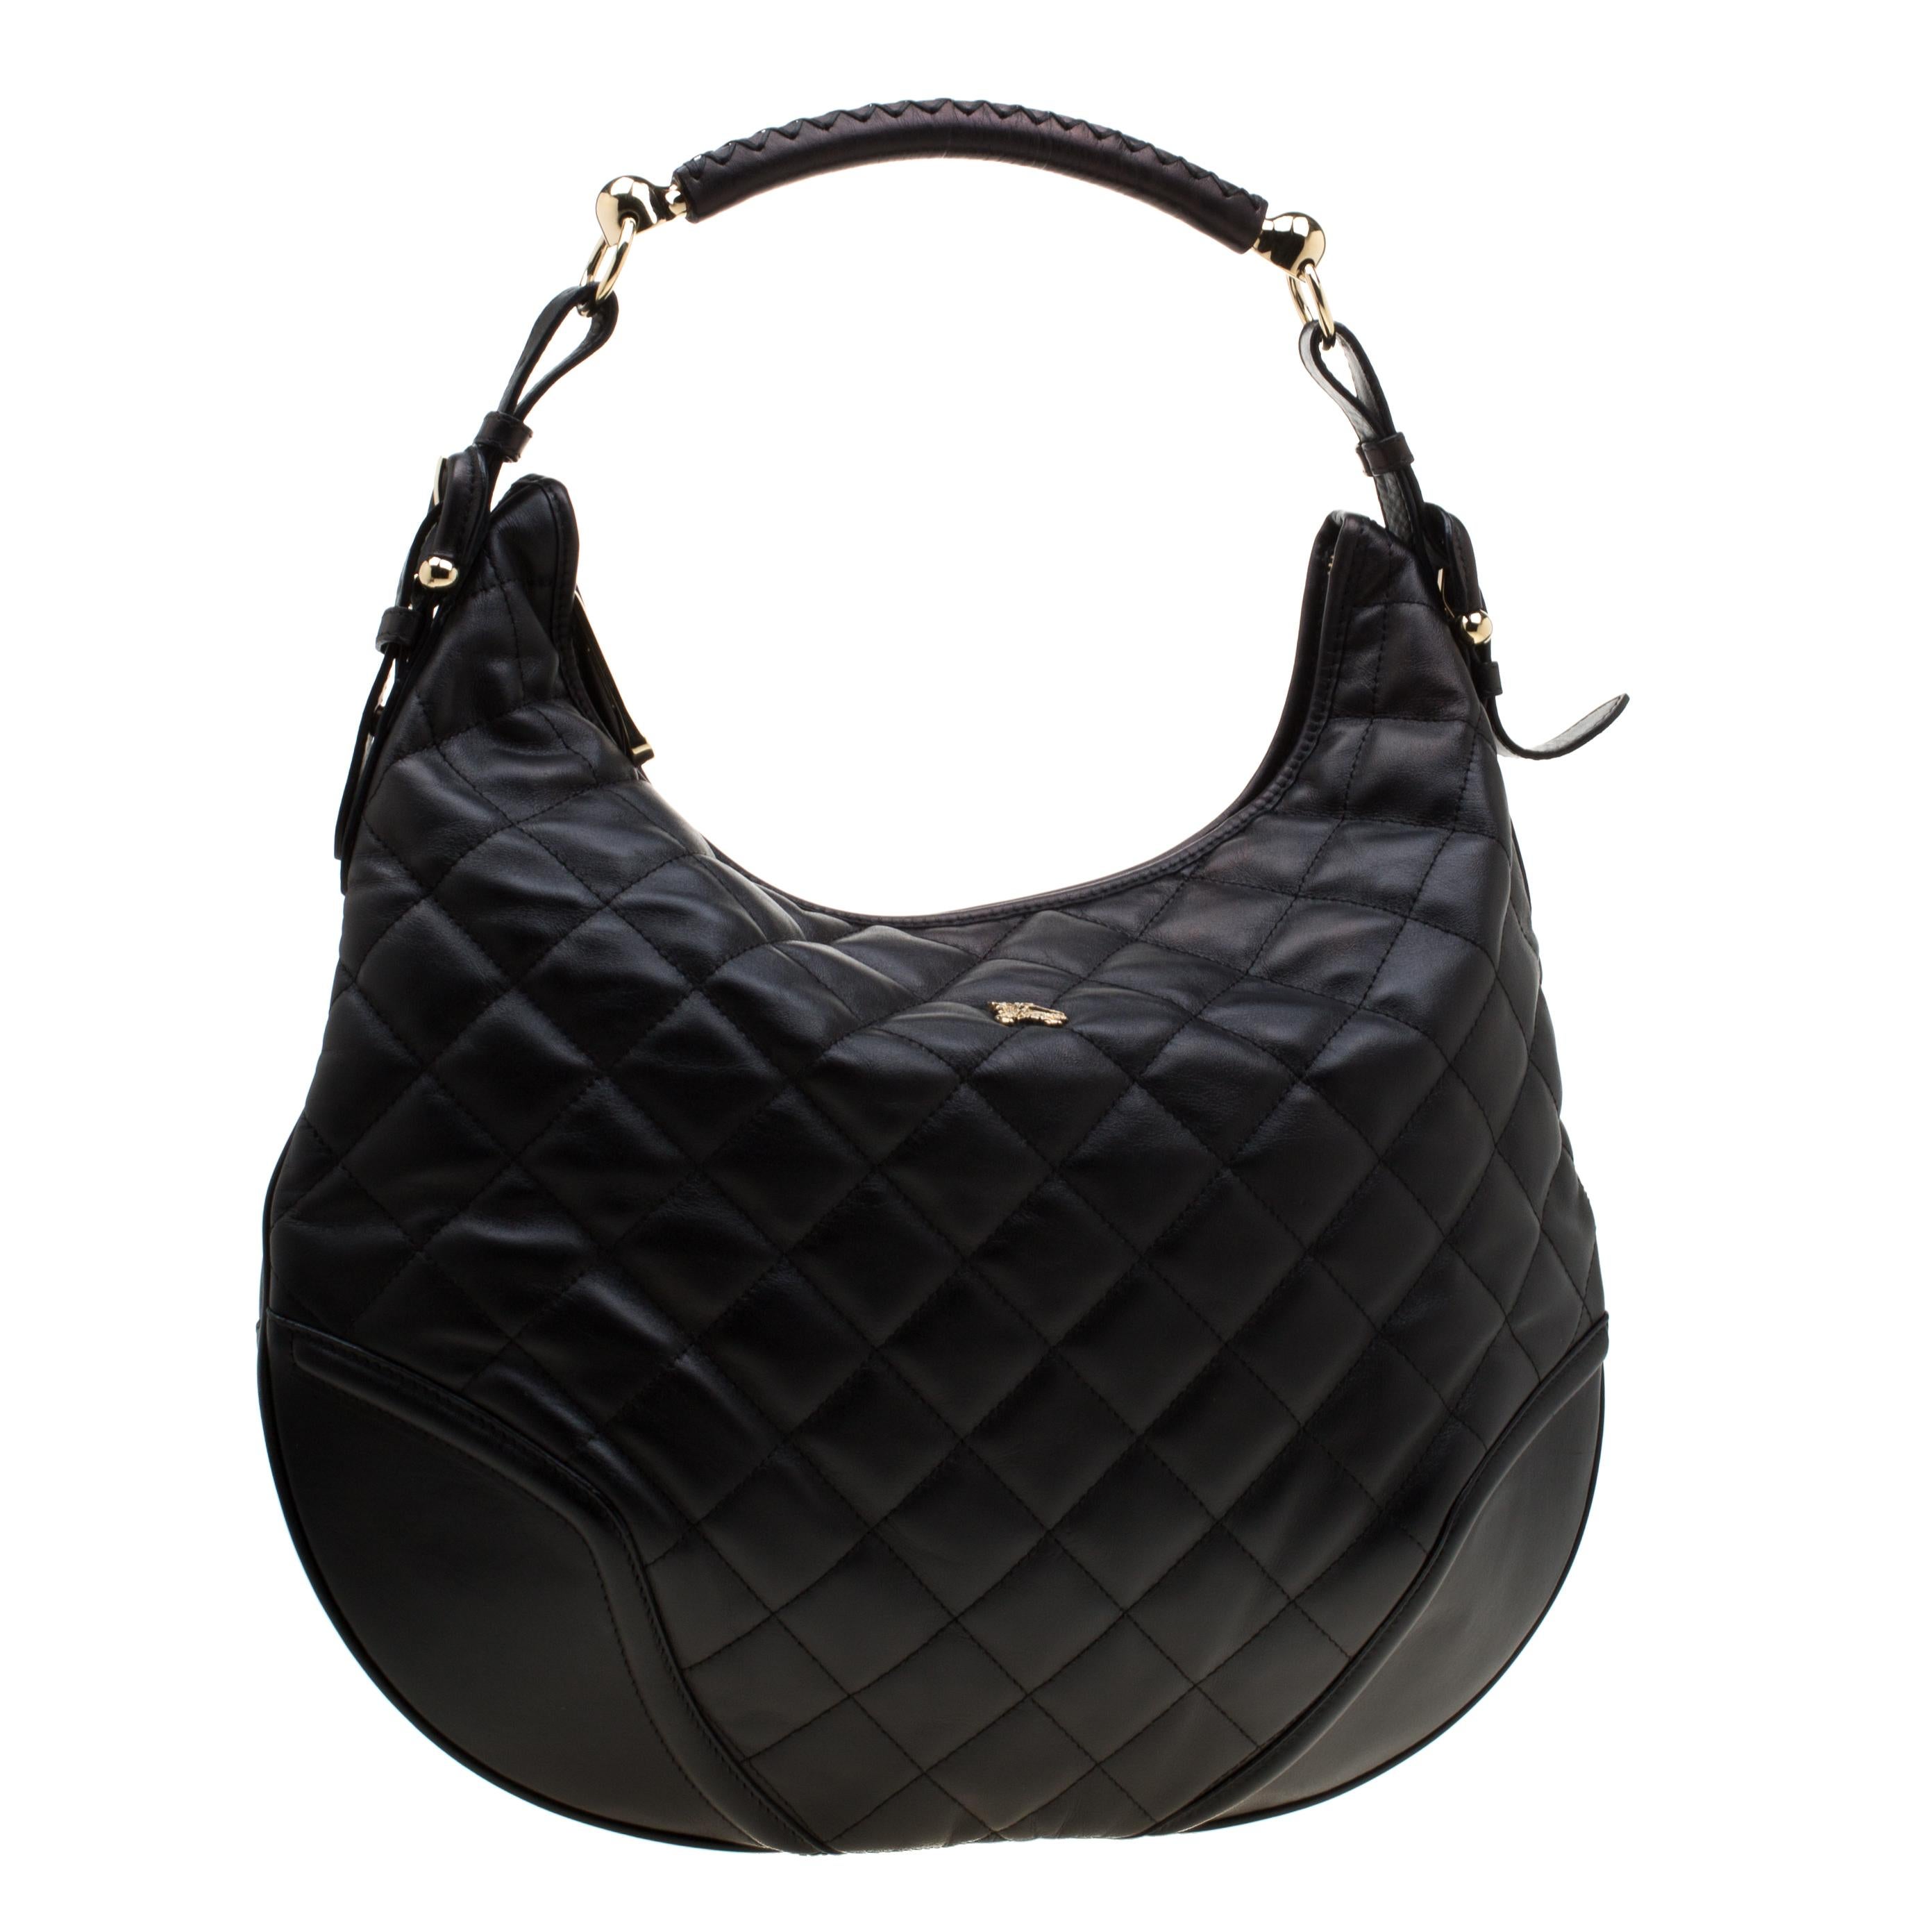 Women's Burberry Black Quilted Leather Hoxton Hobo